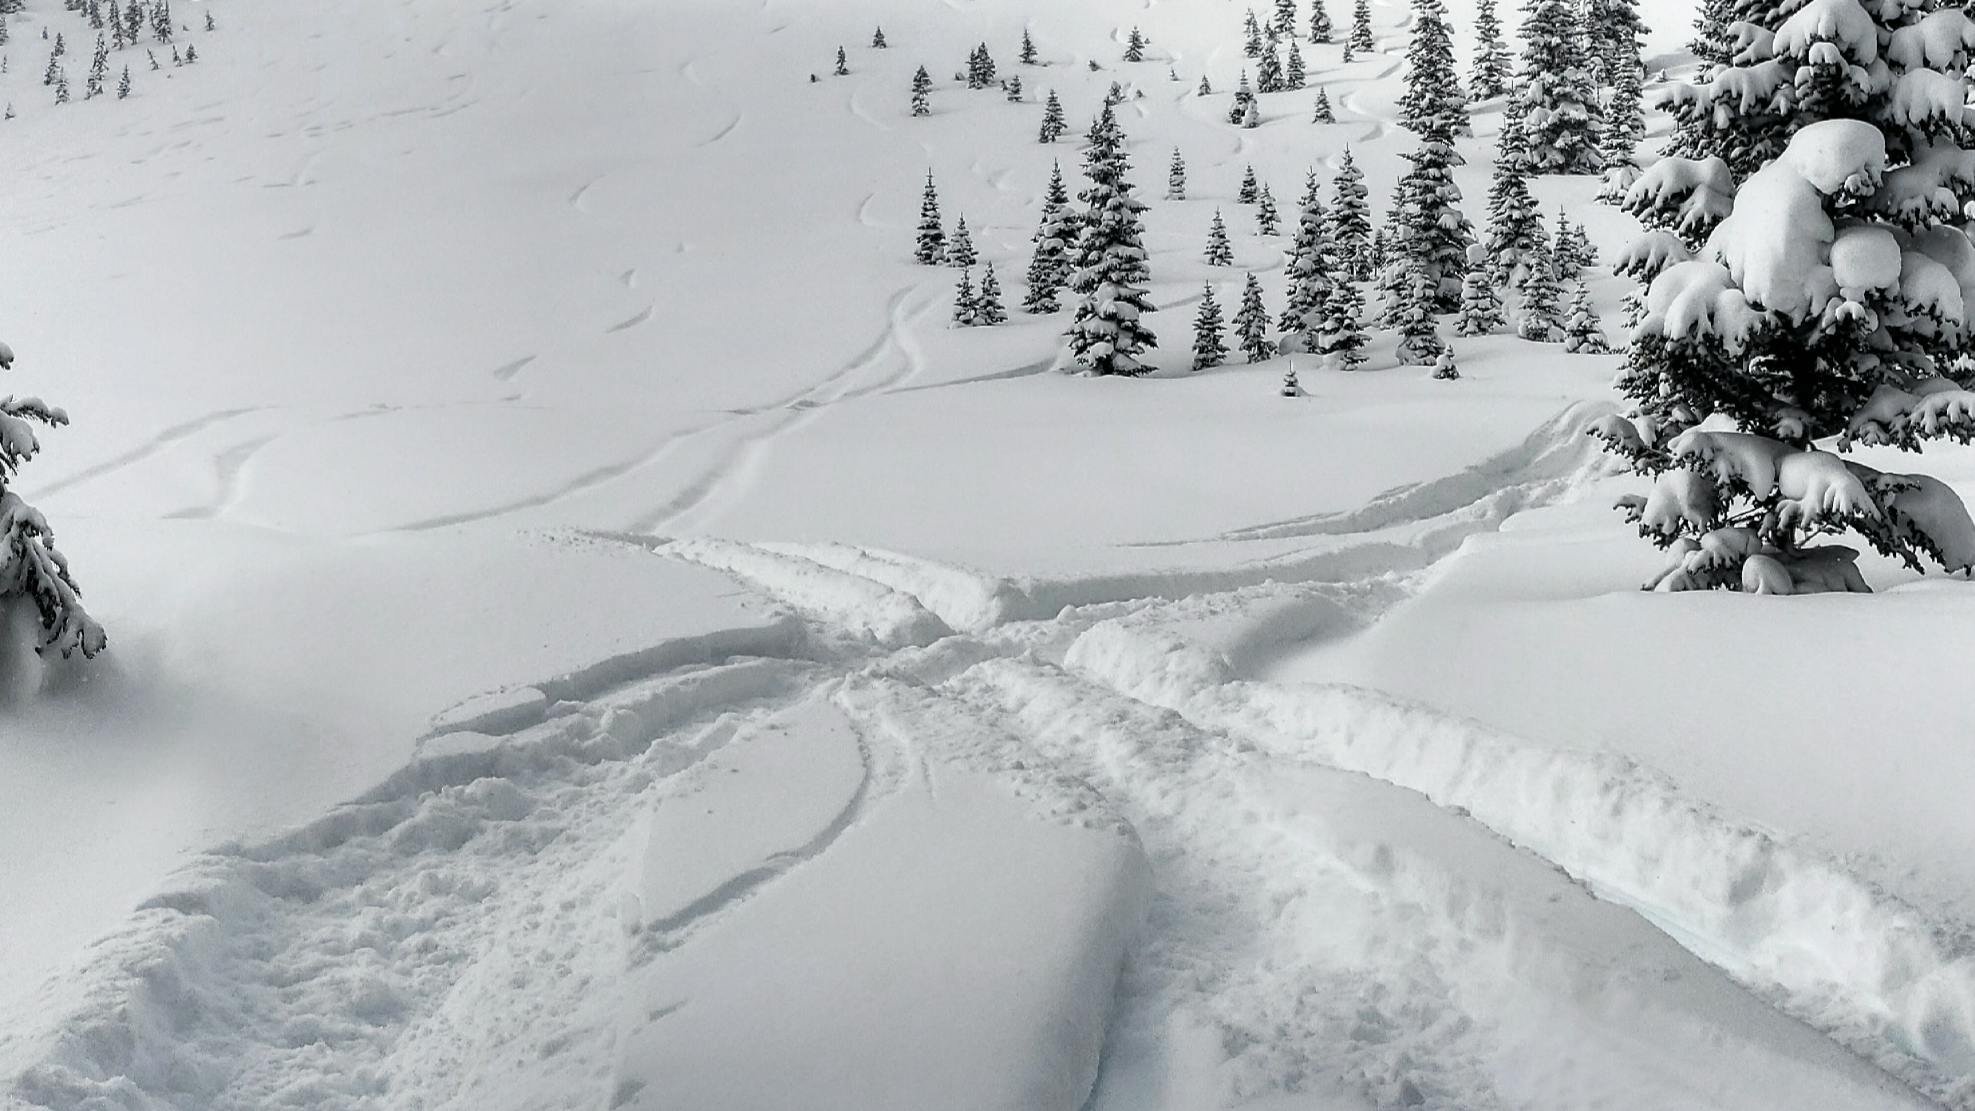 Tracks left by skiers and snowboarders through fresh powder